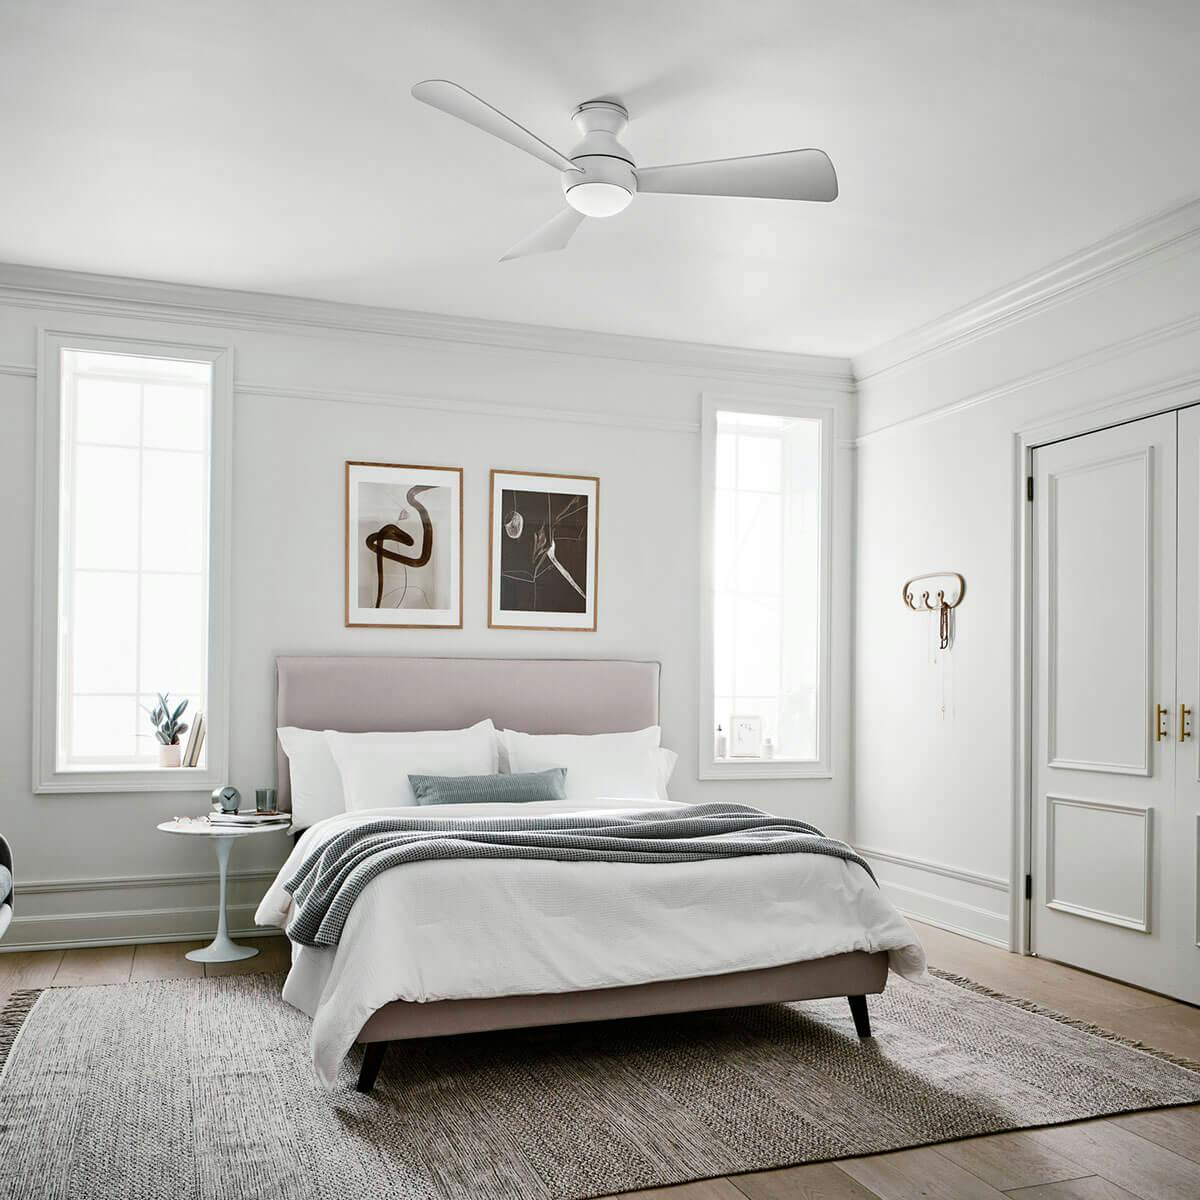 Day timebedroom image featuring Sola 330152MWH